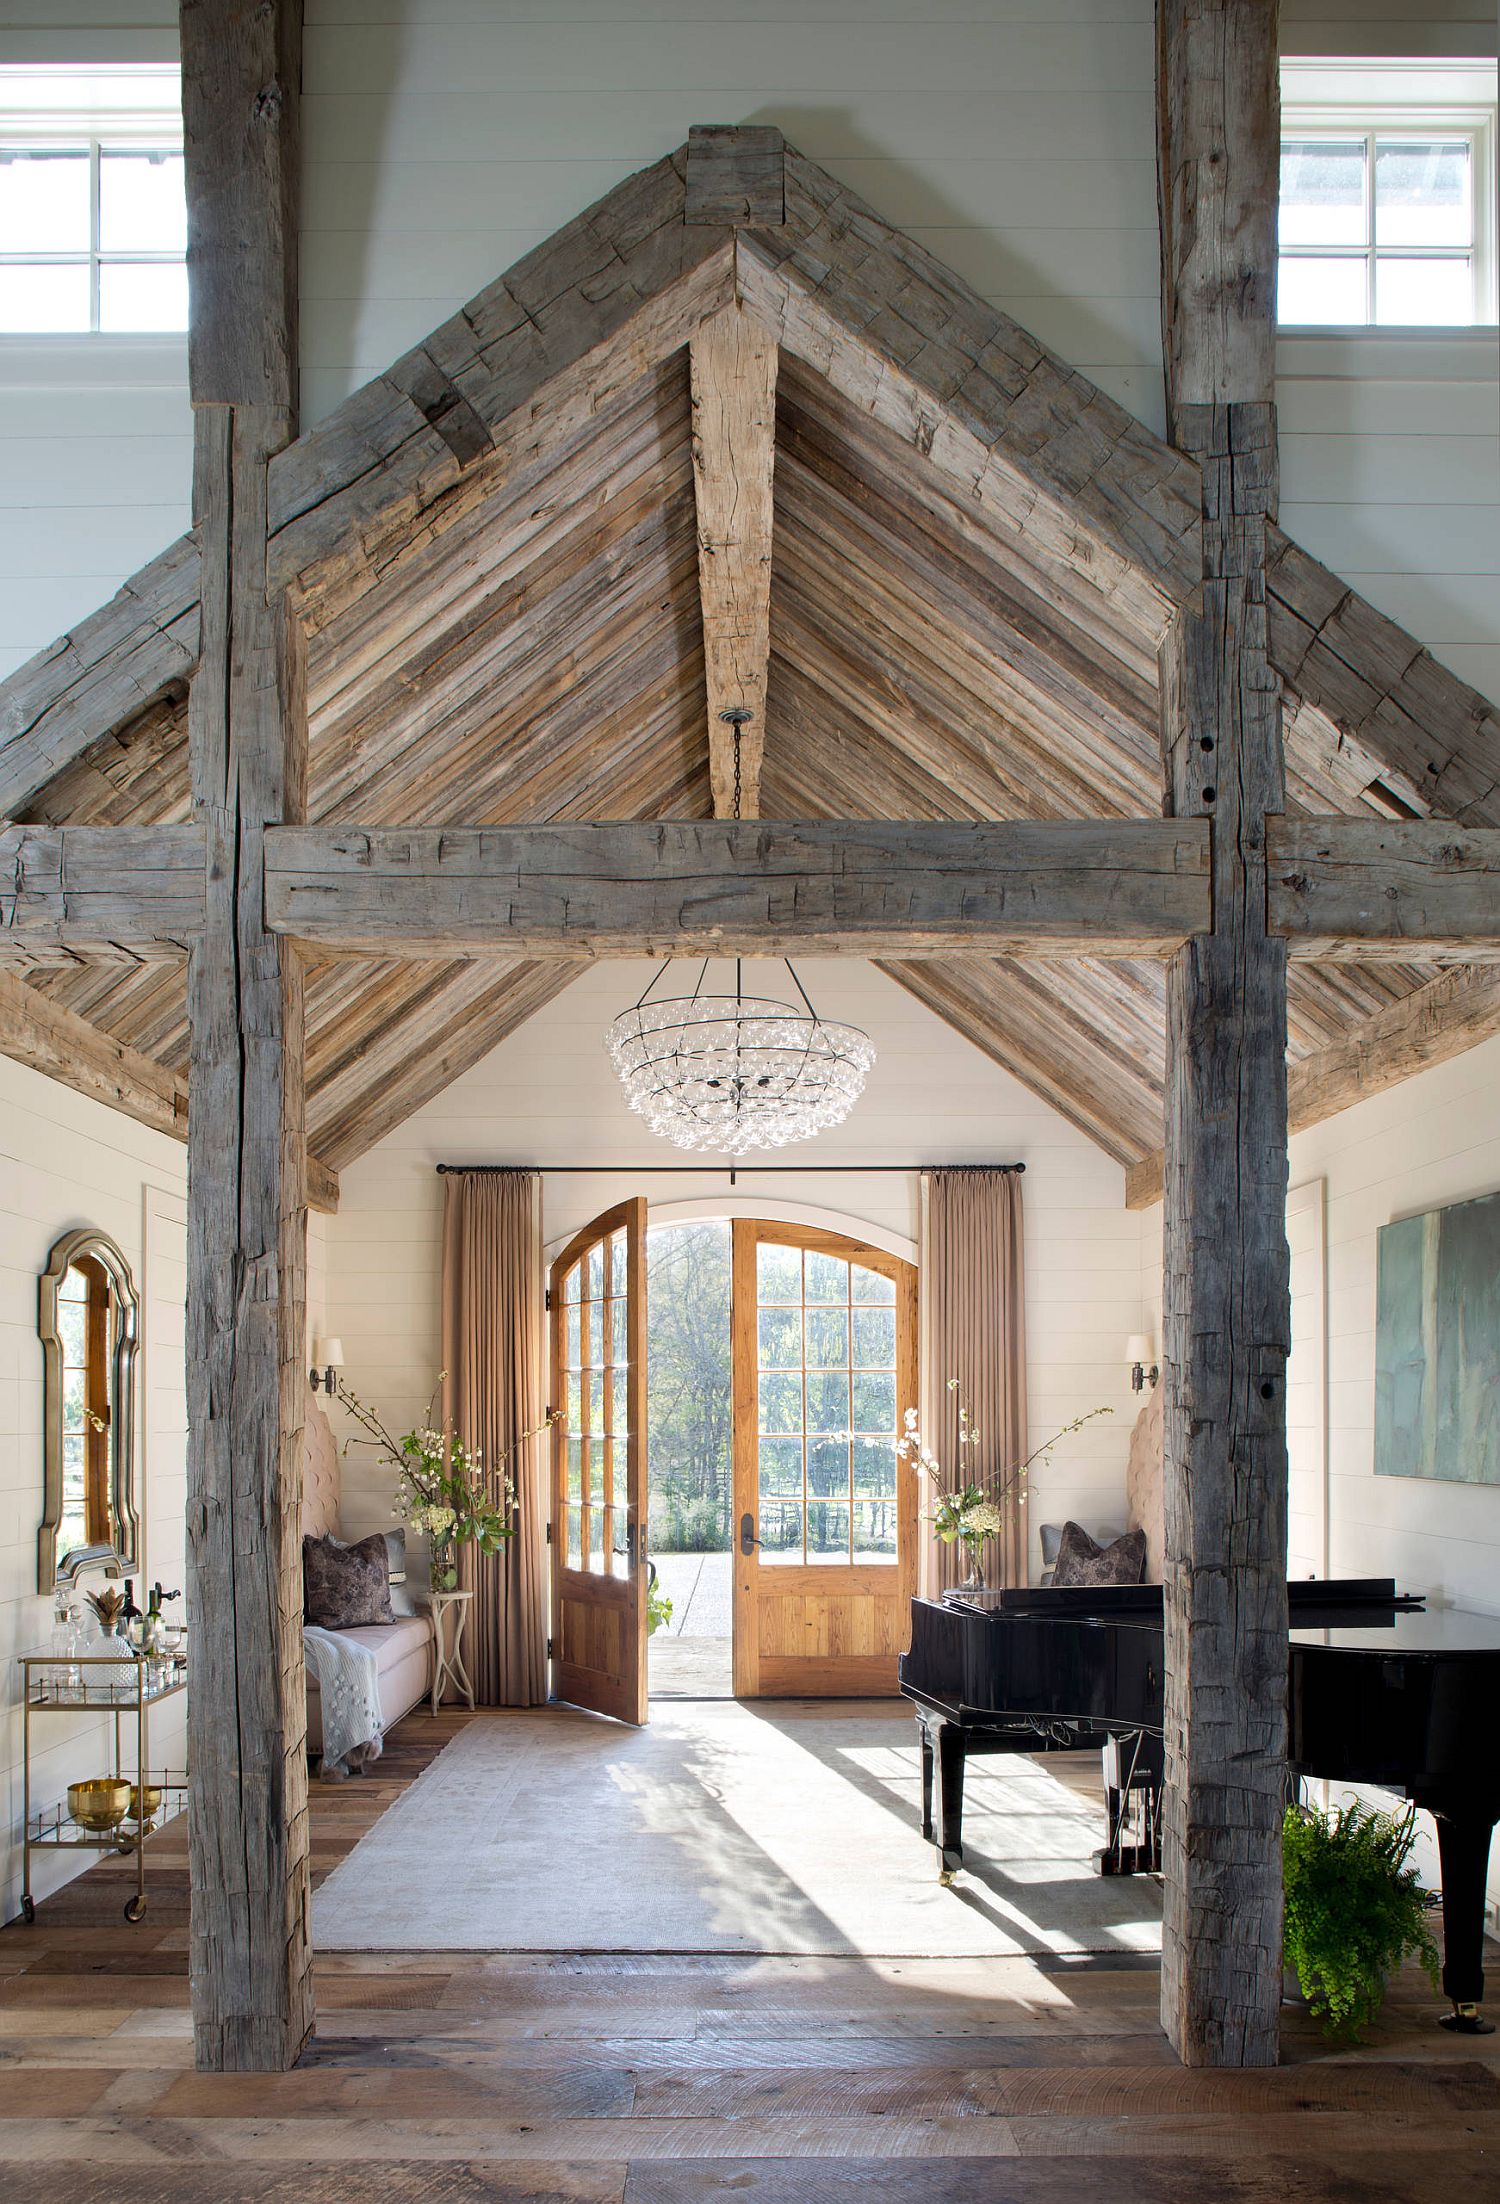 Awesome farmhouse style entry with brilliant use of wooden beams and ceiling tha create a room within a room